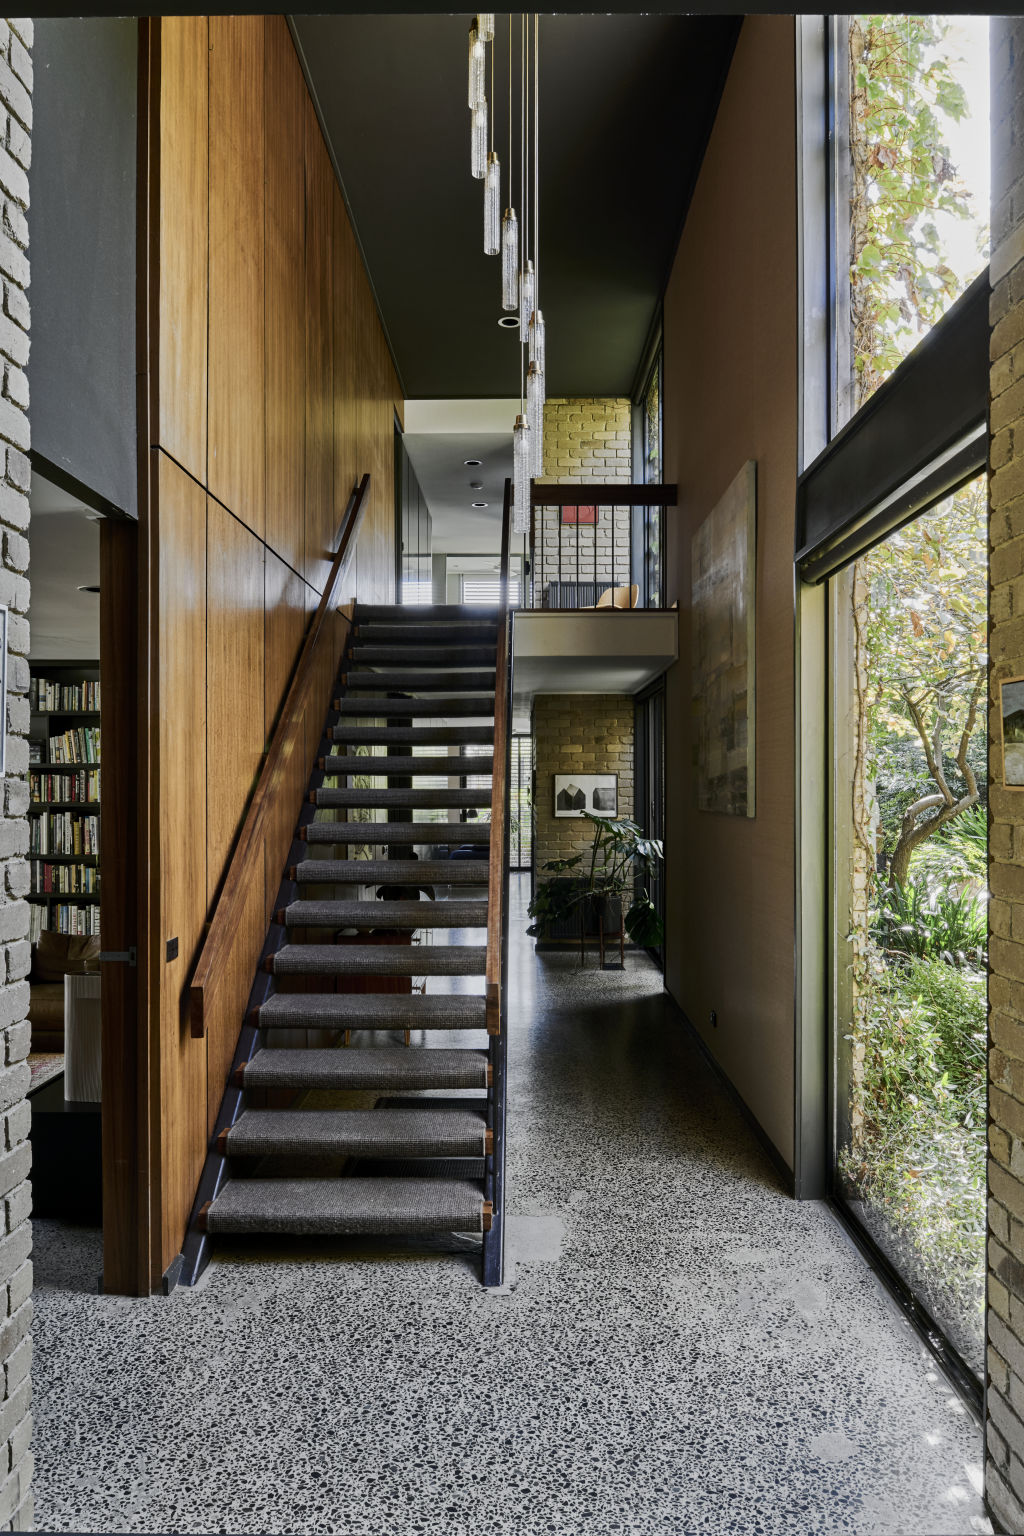 A soaring double-height volume allows the staircase full, fabulous reign. Photo: Supplied